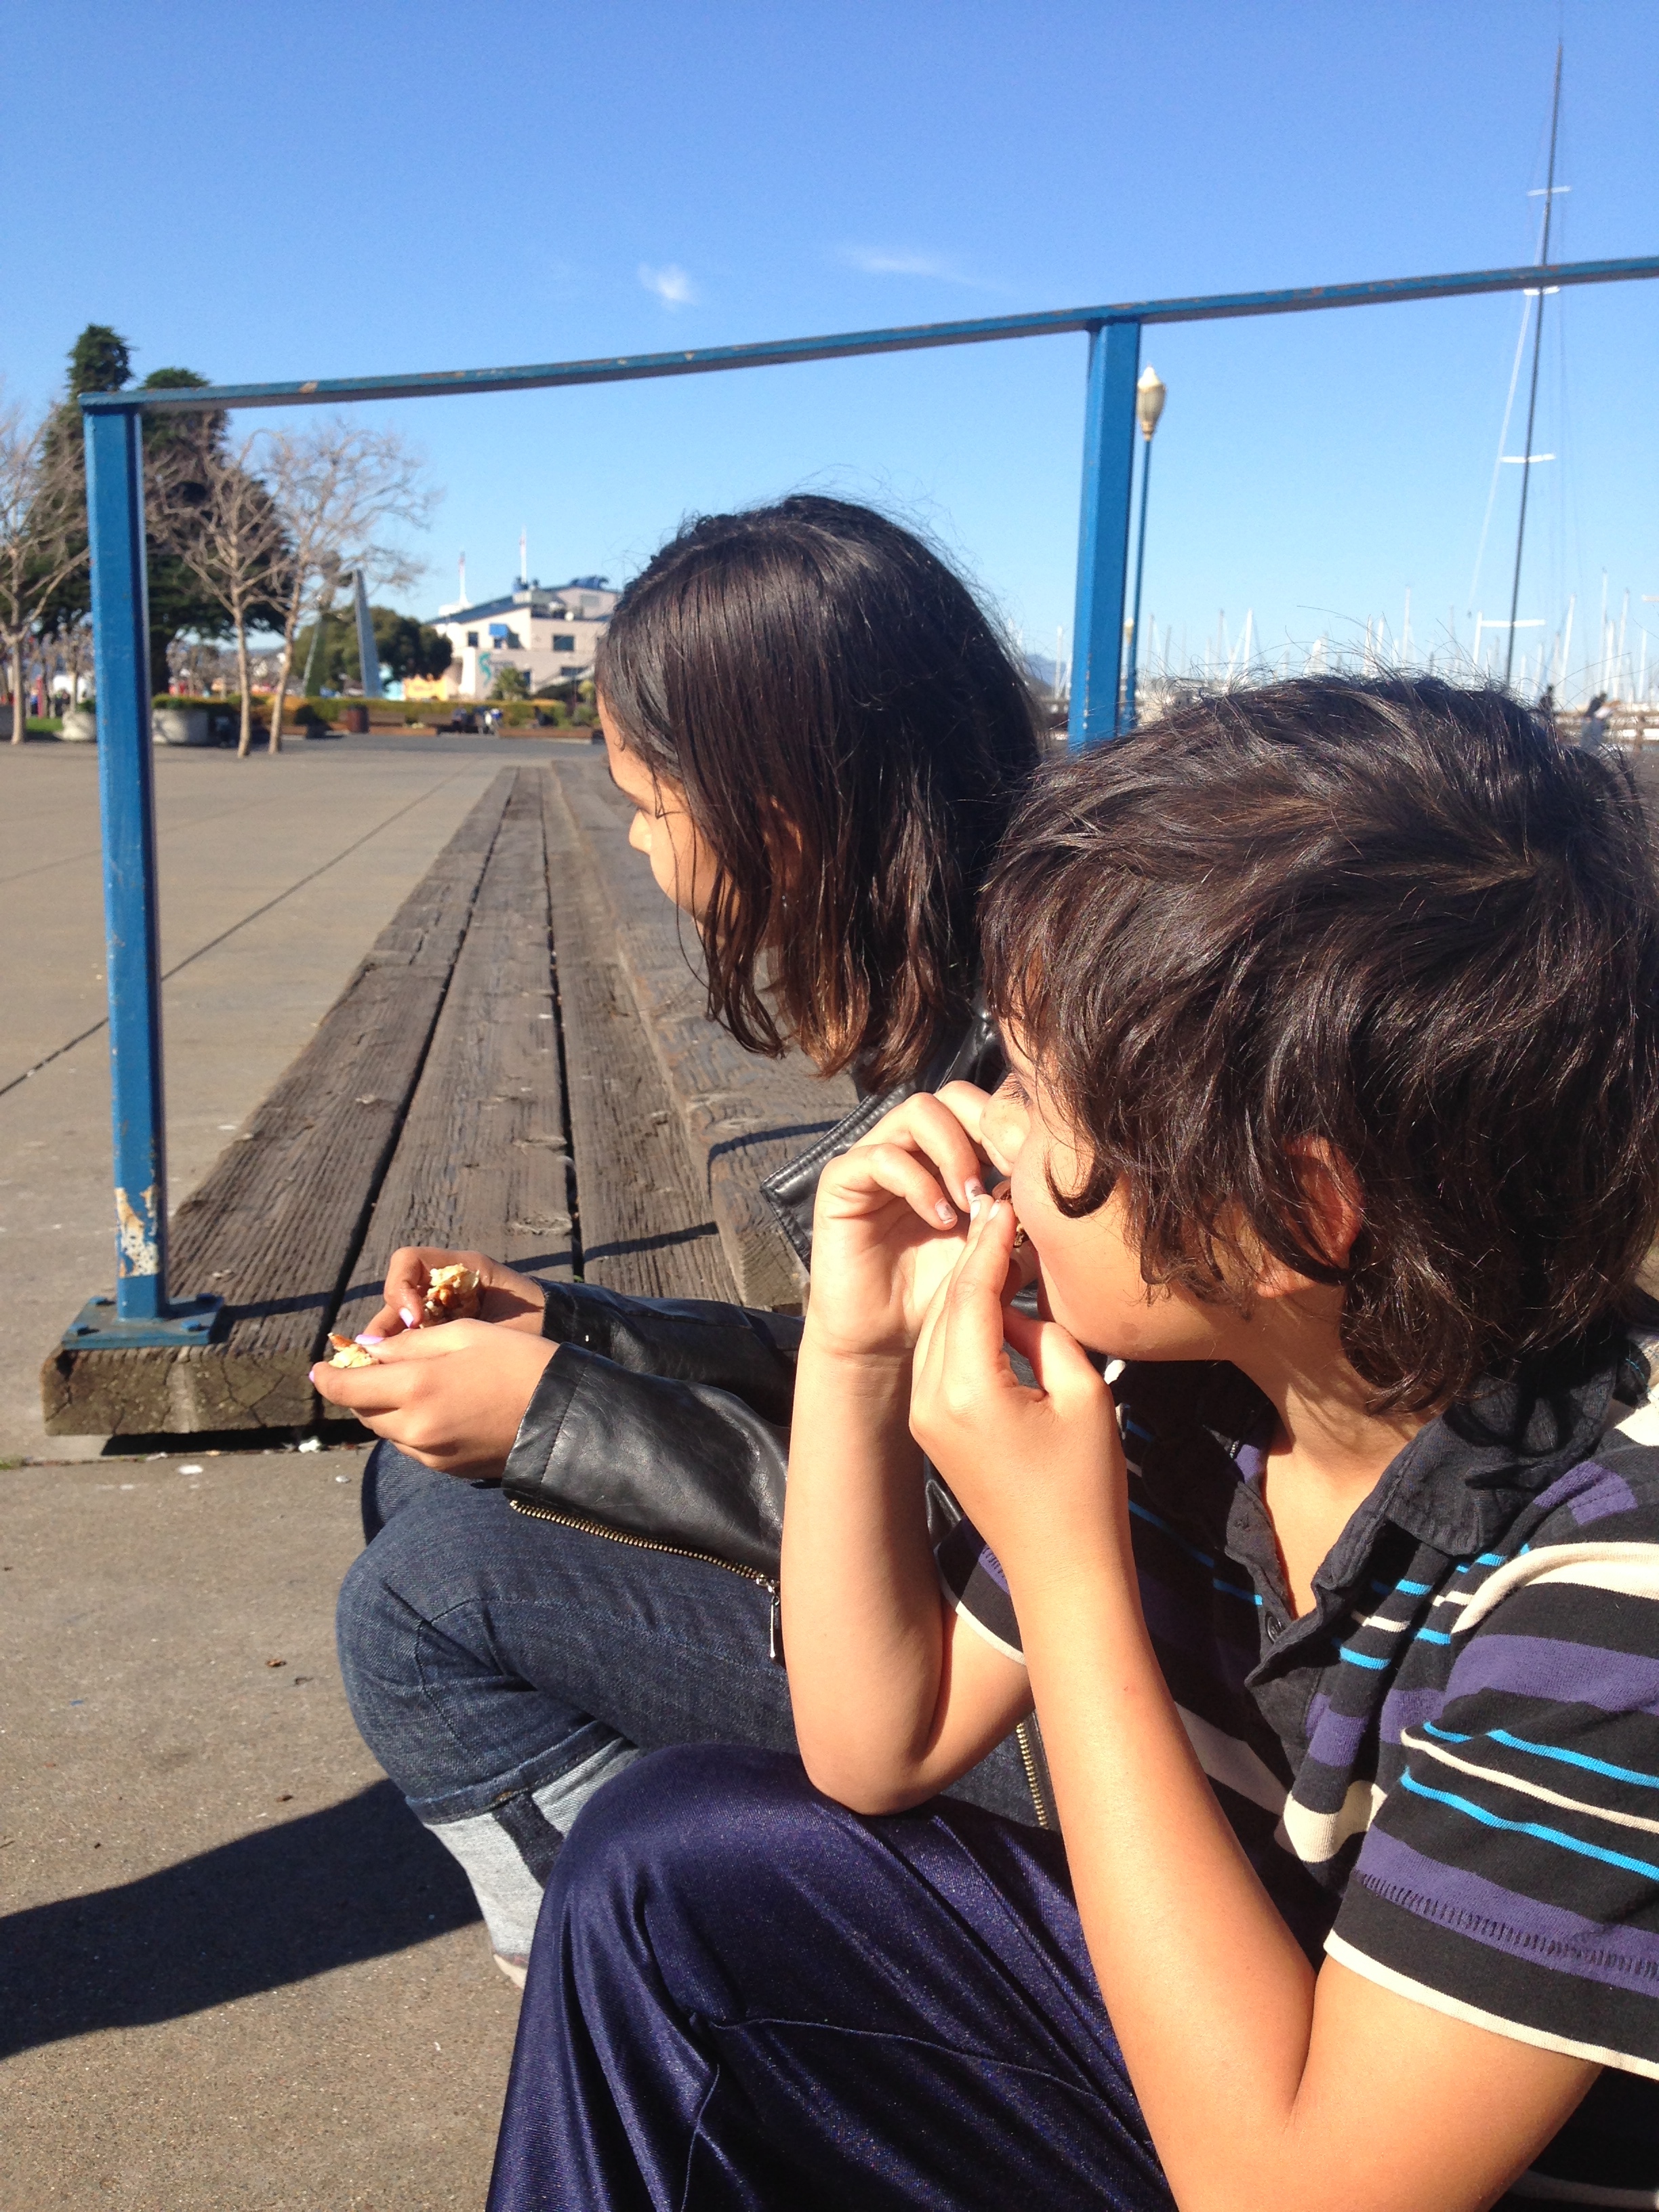 a boy and girl sitting on a bench